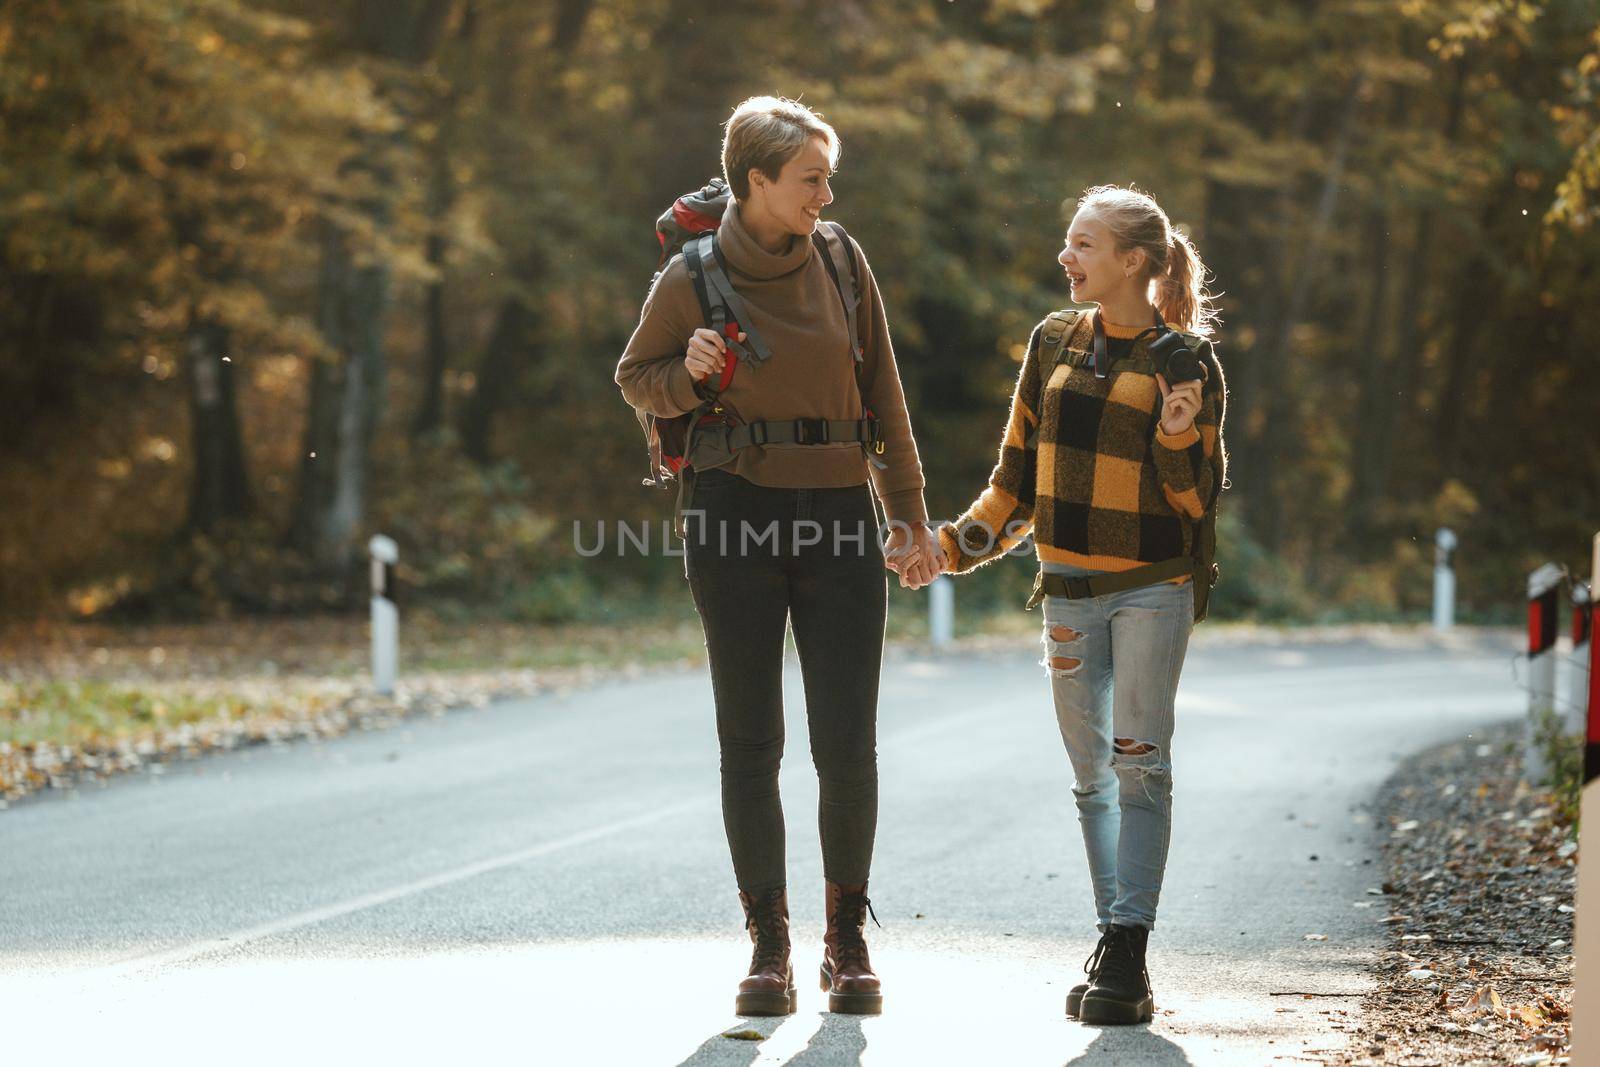 Shot of a teen girl and her mom walking together through the forest in autumn.